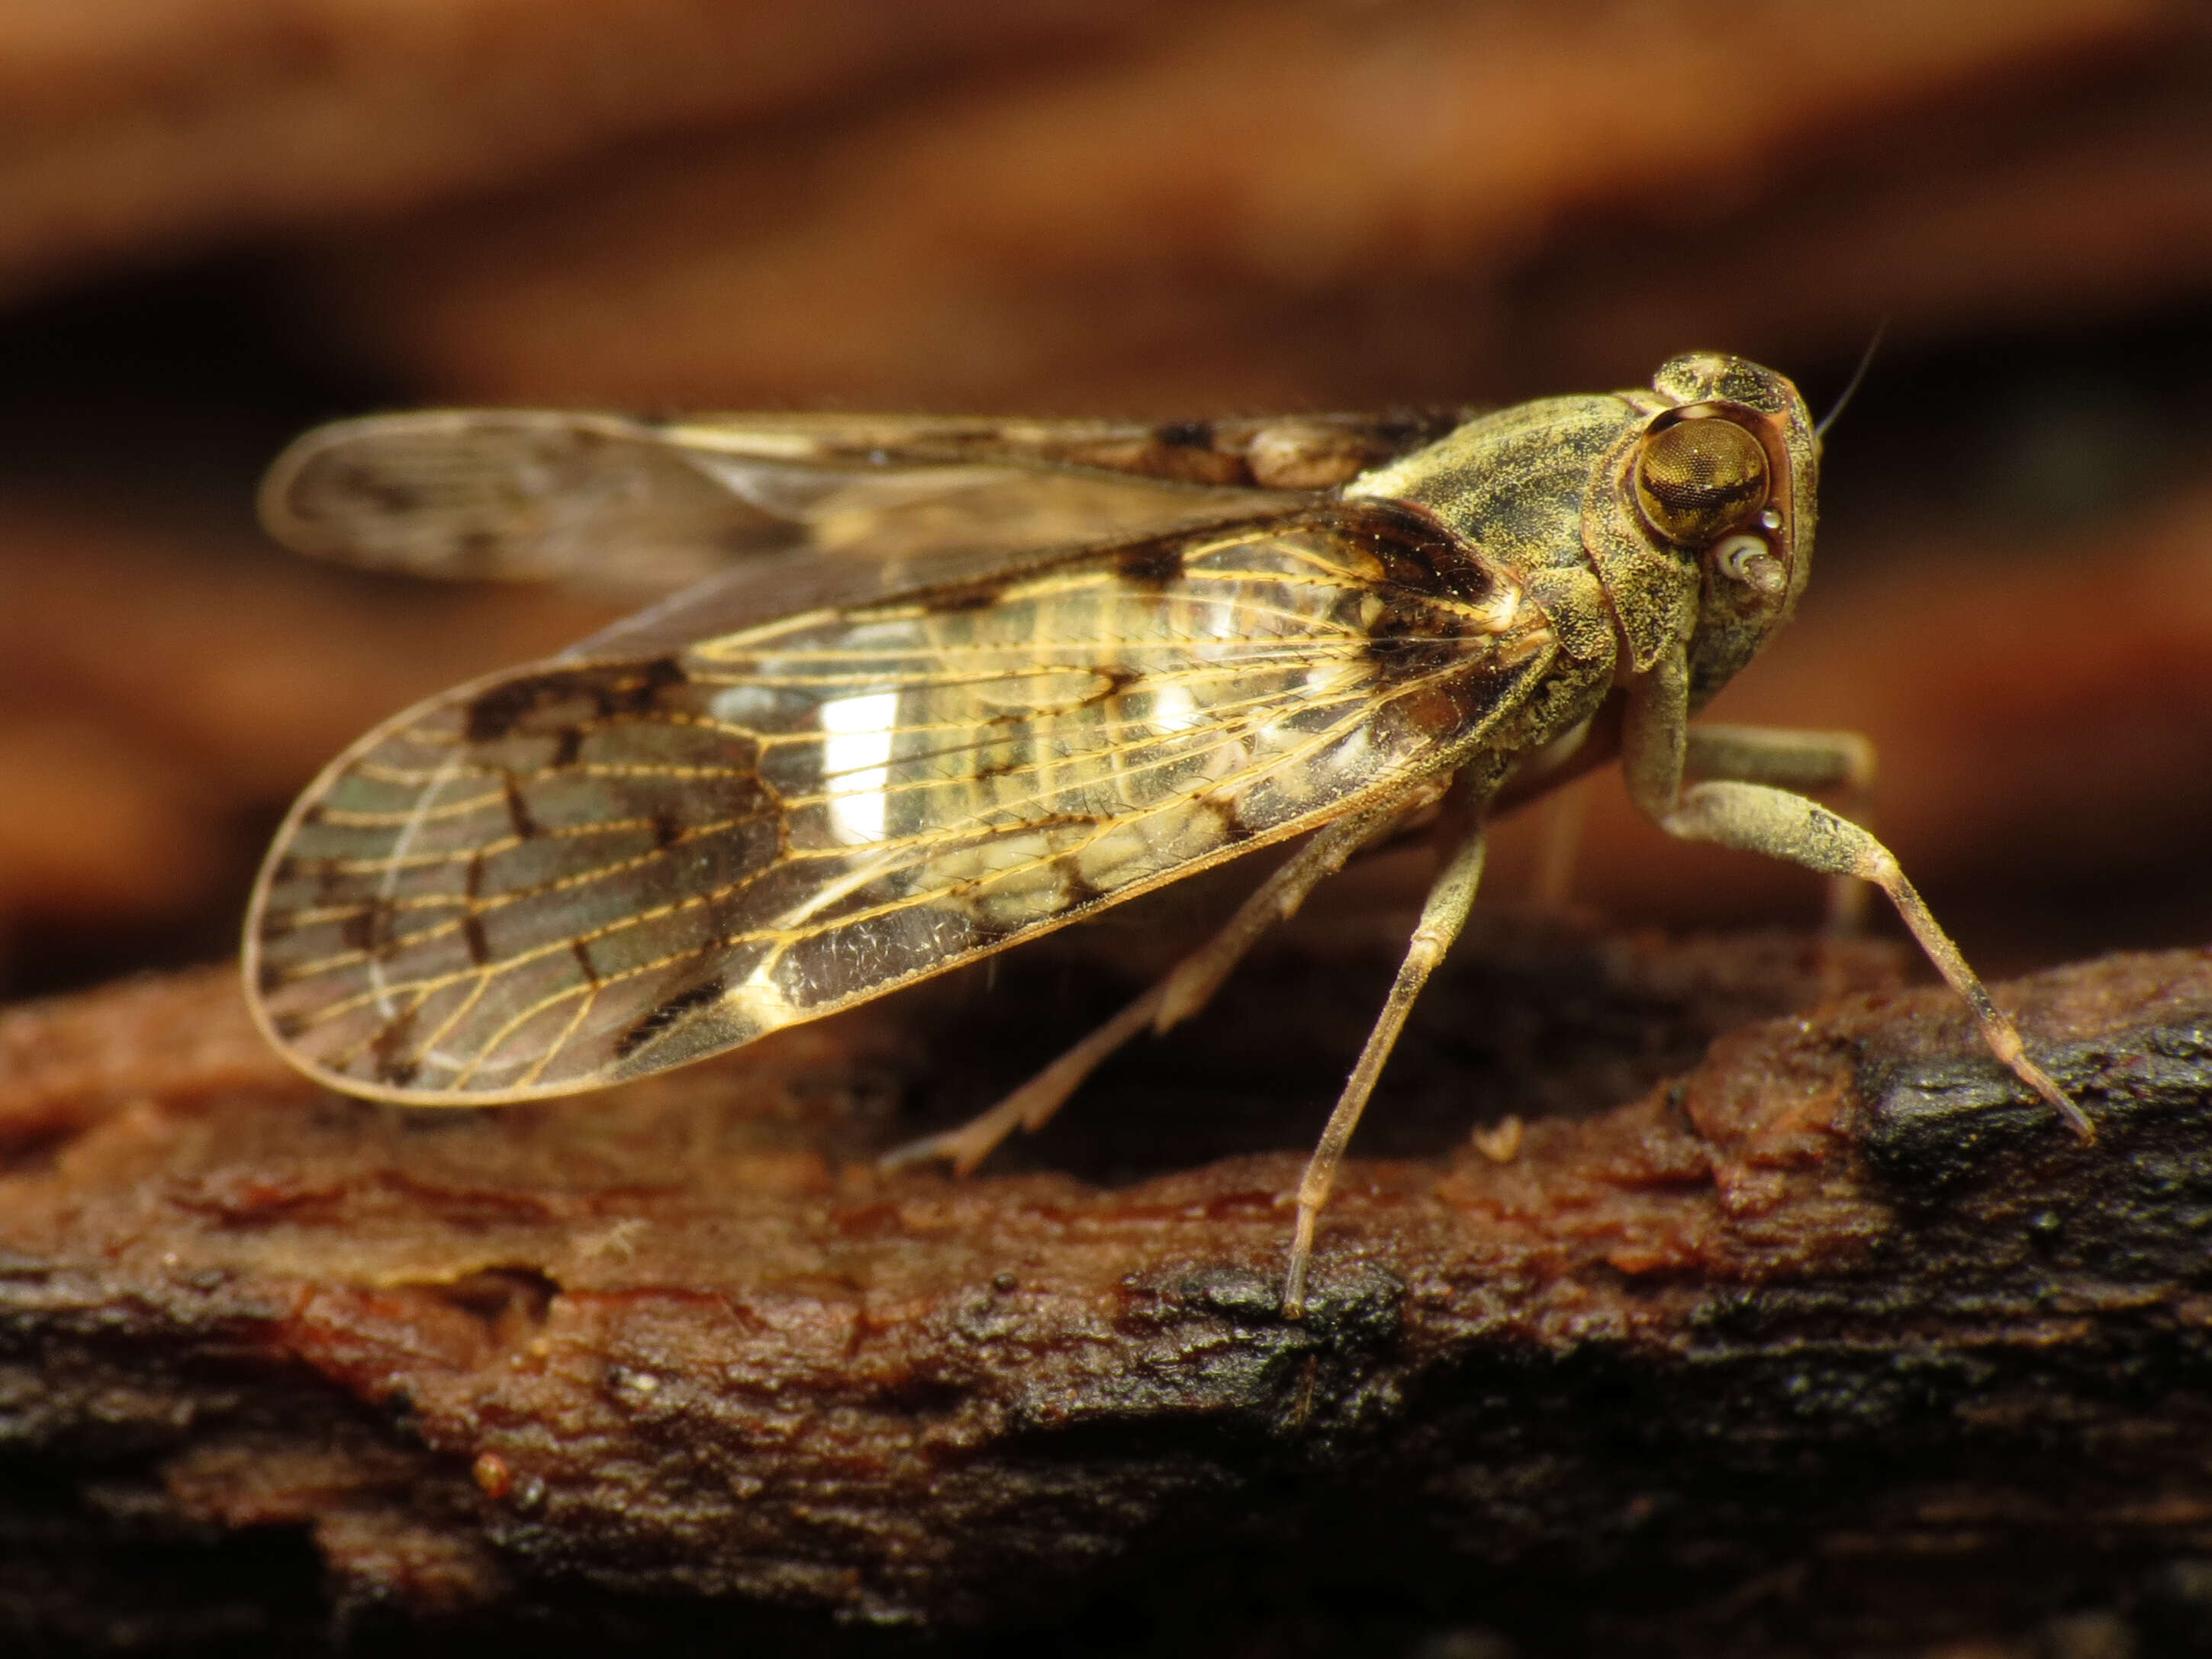 Image of cixiid planthoppers